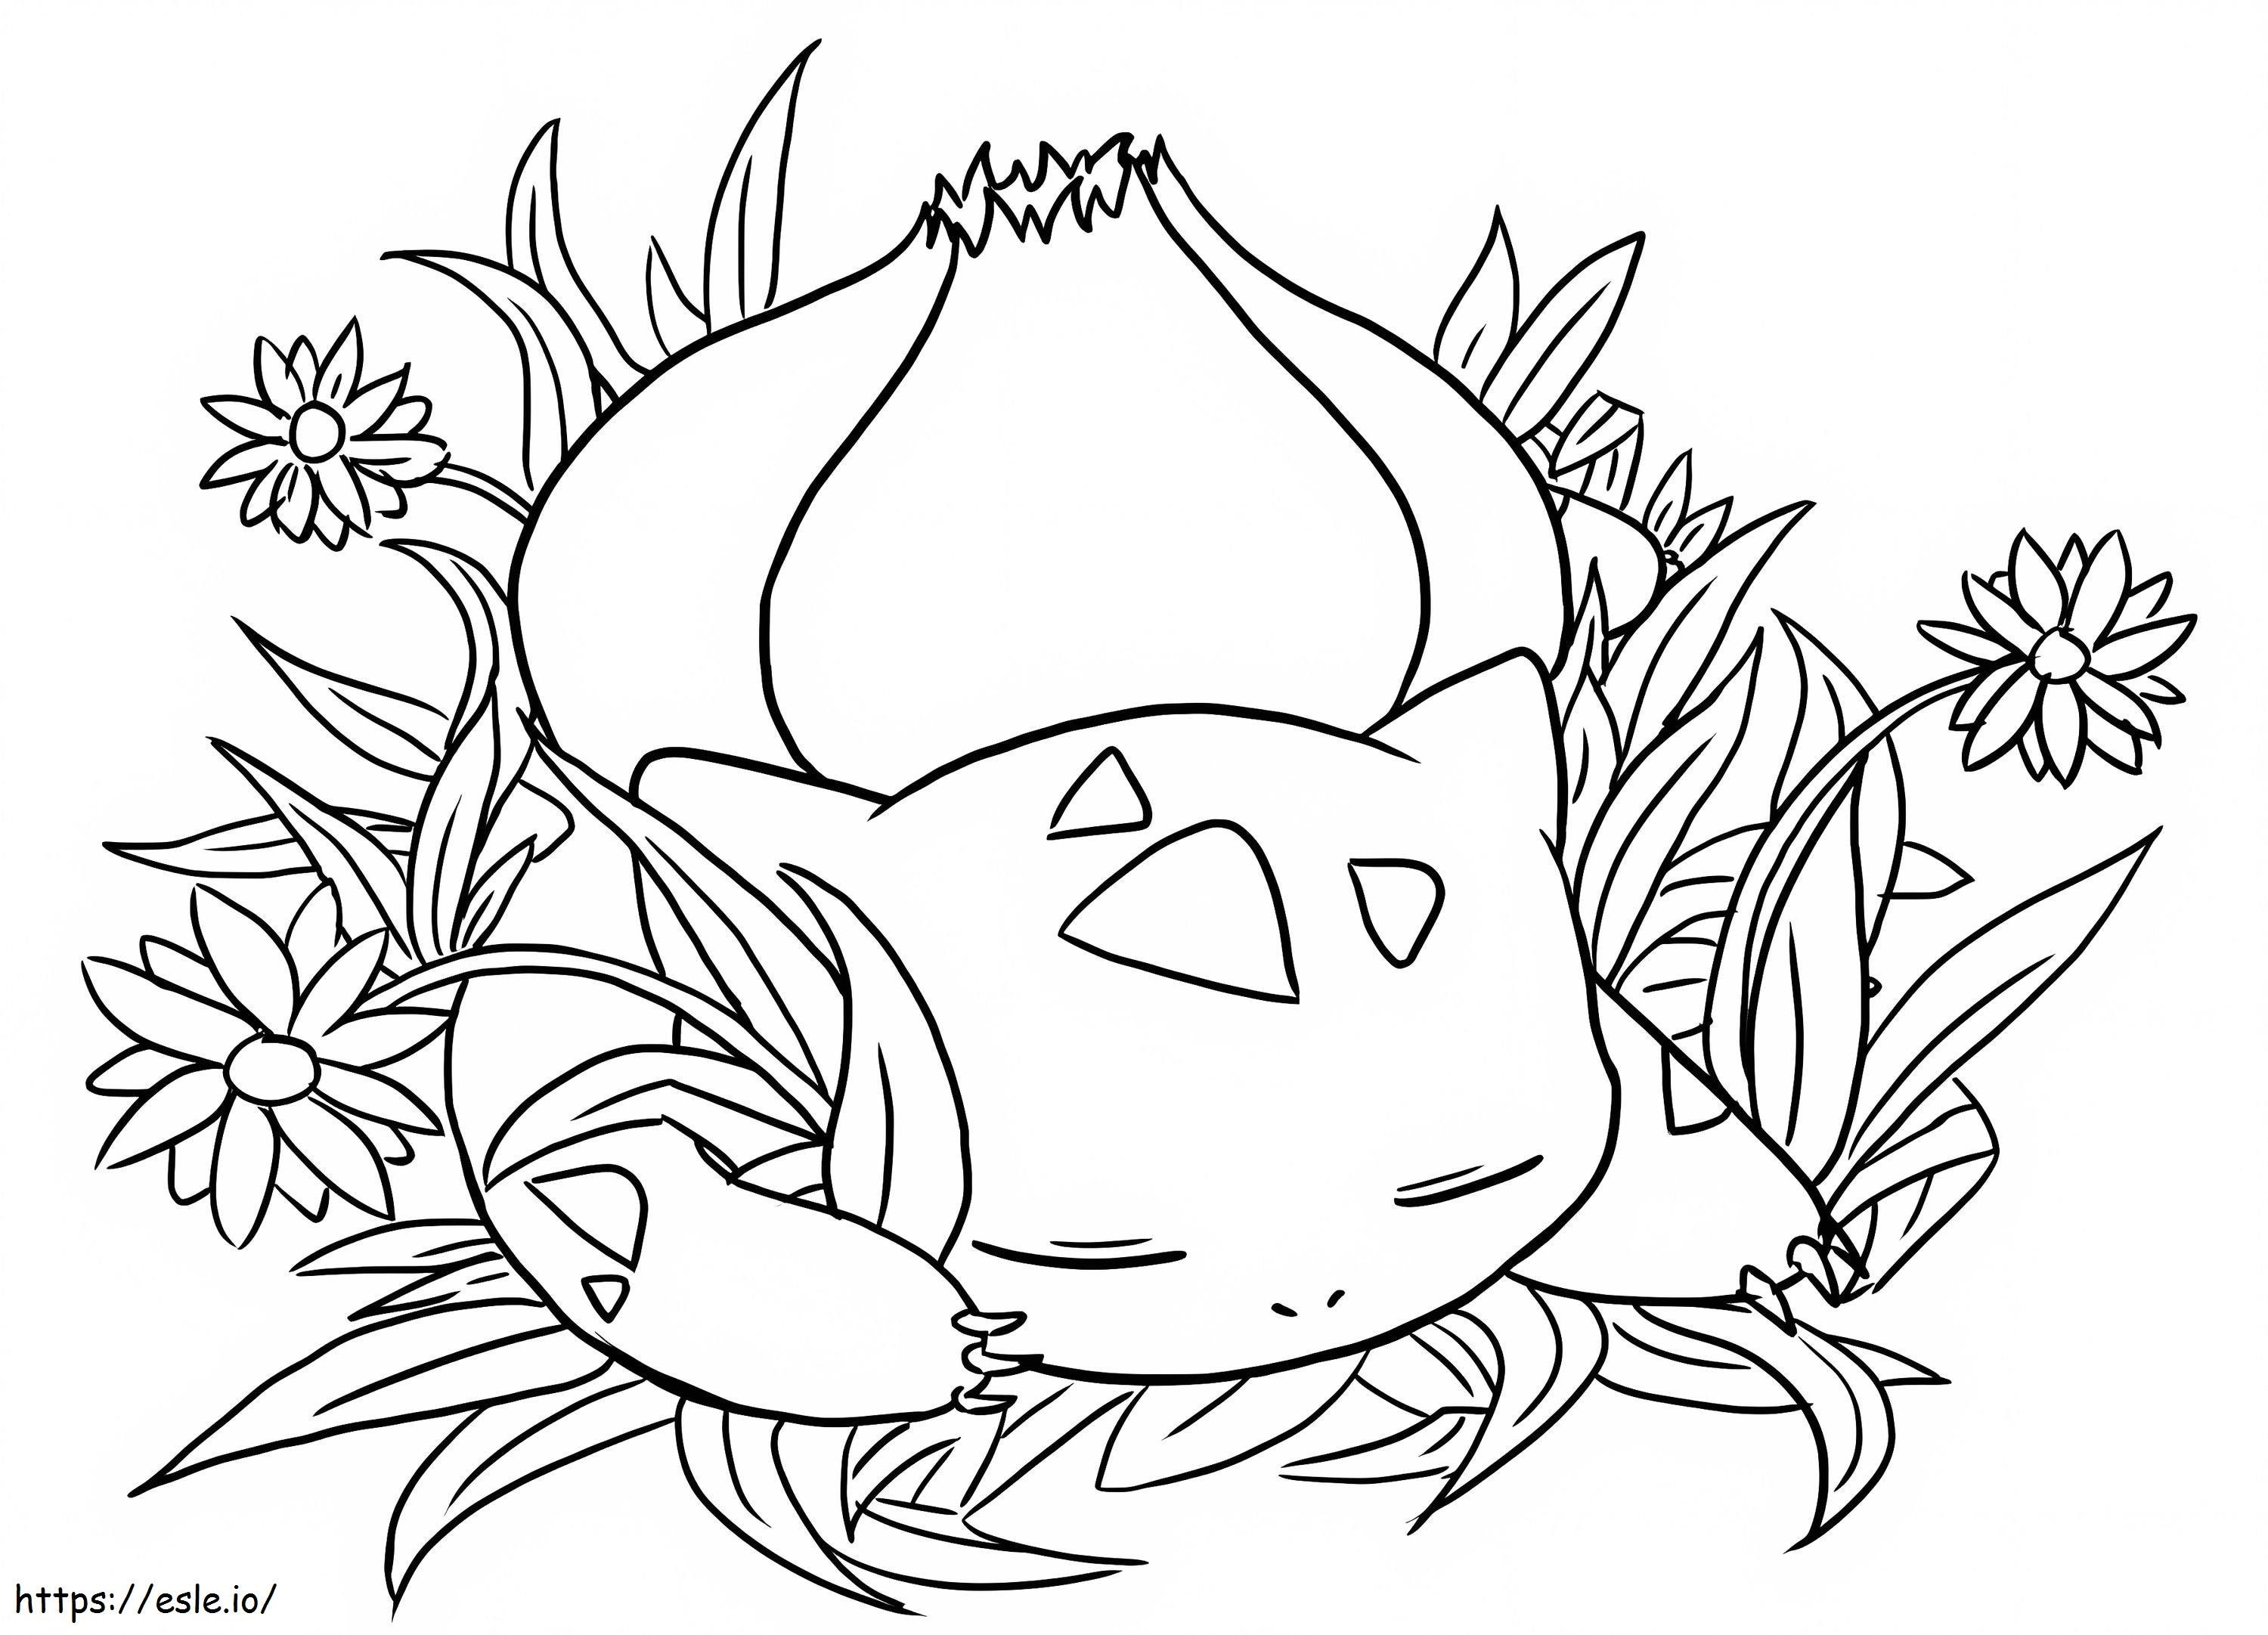 Bulbasaur 2 coloring page